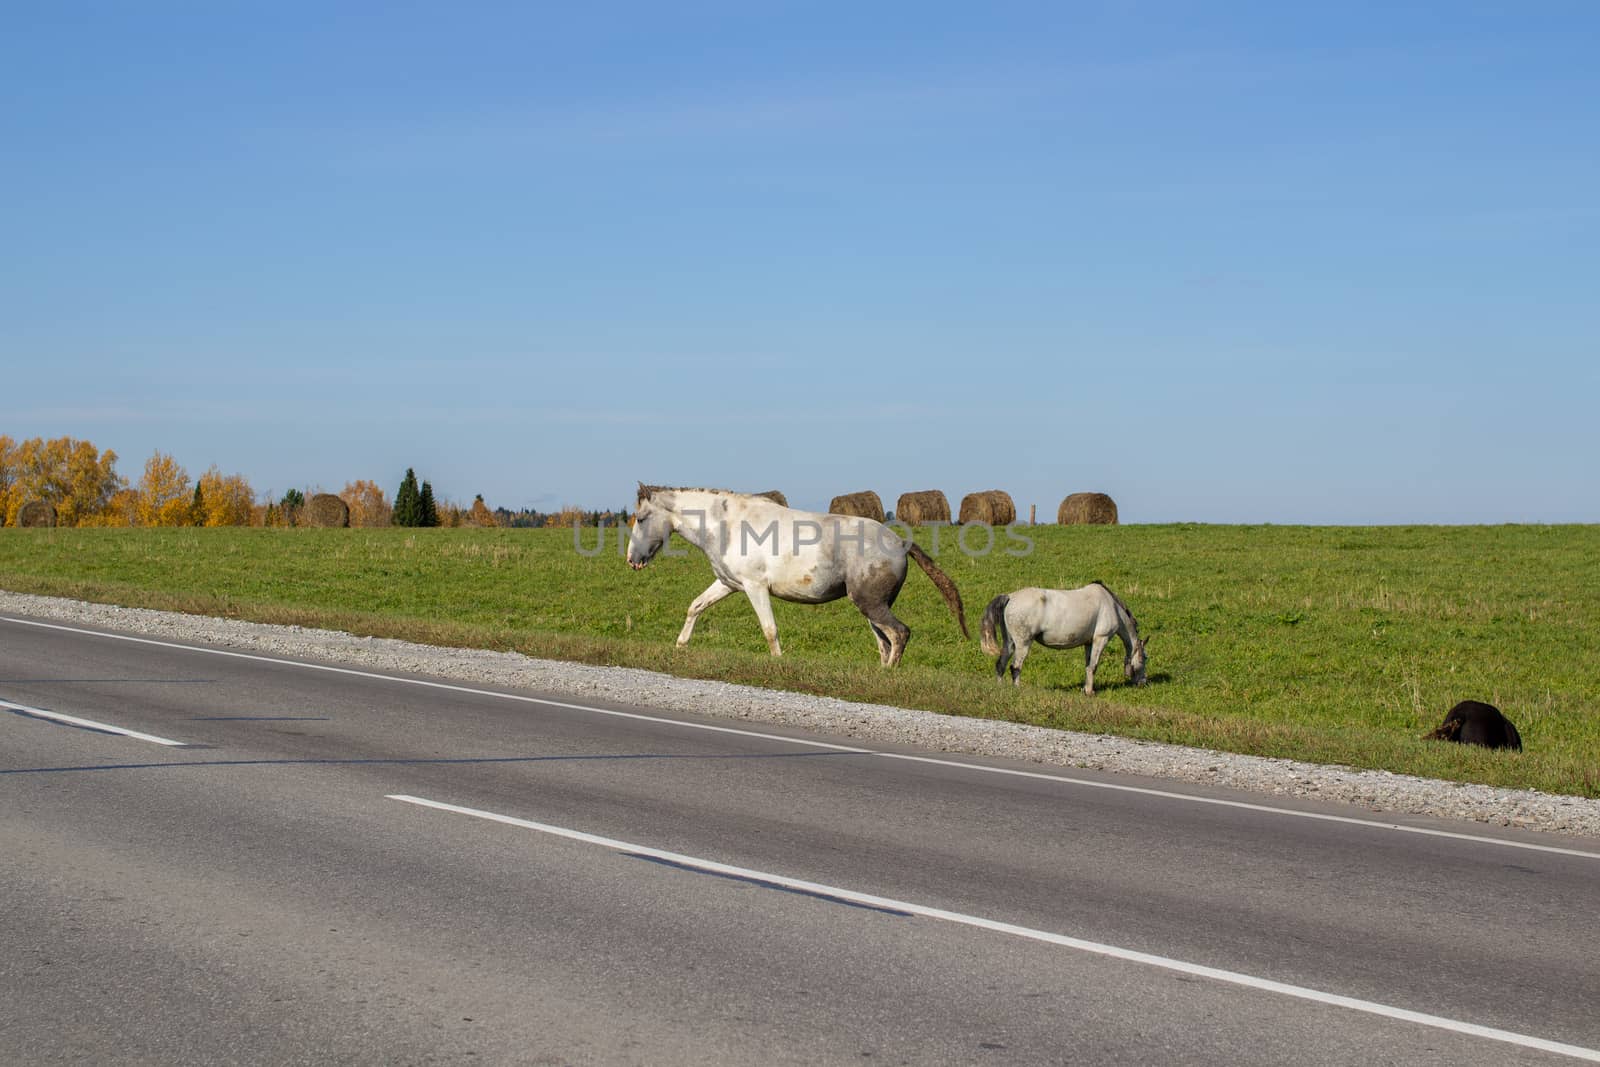 Horses and mares graze along a busy road. On the background of a beautiful field and hay bales for animals.Horses of different colors, black and white